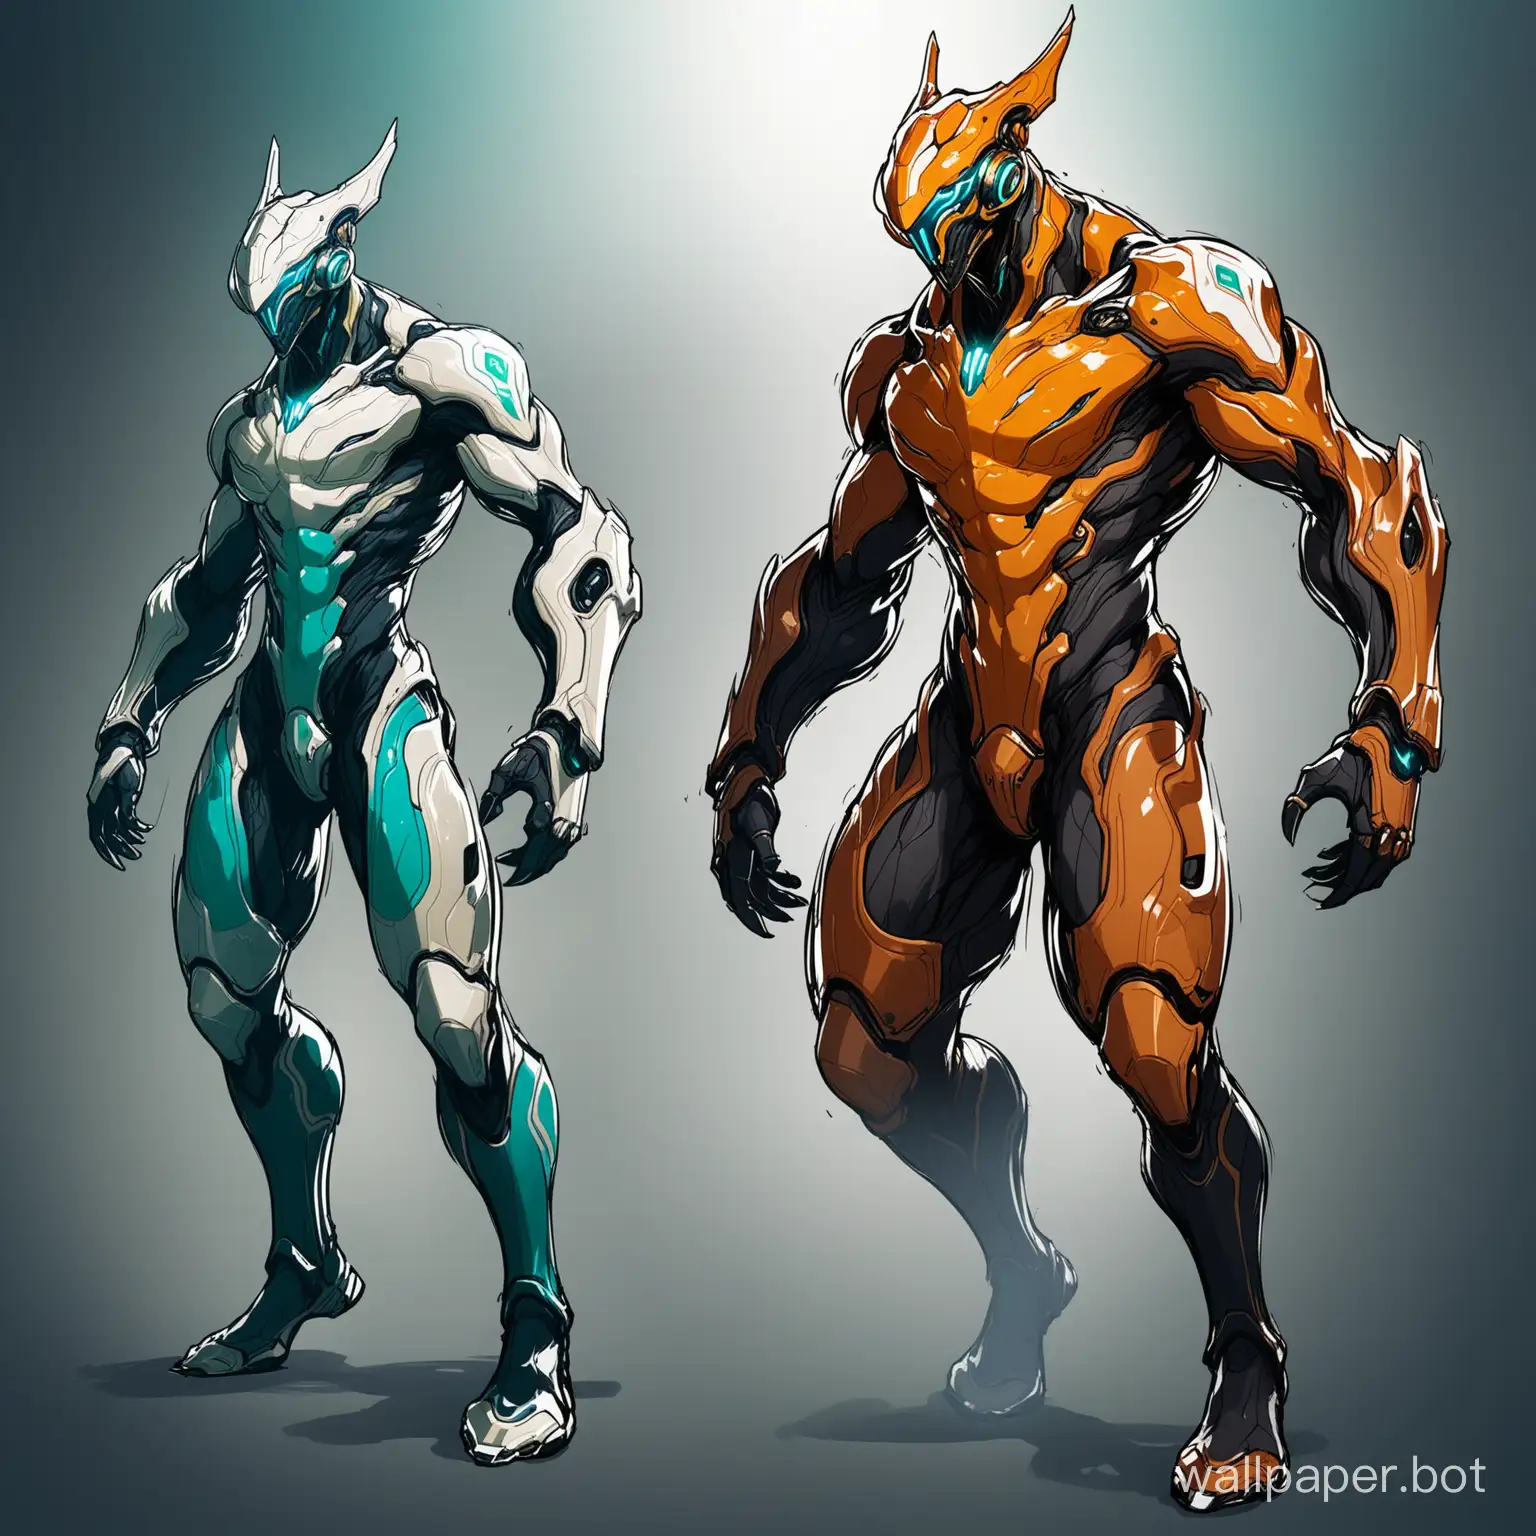 Create a giant with these features:

Thin free runner, 
equally flesh and machine, 
male giant

Use visual traits inspired by:
Neo-Human Casshern, Warframe Tenmo, and EVA Units